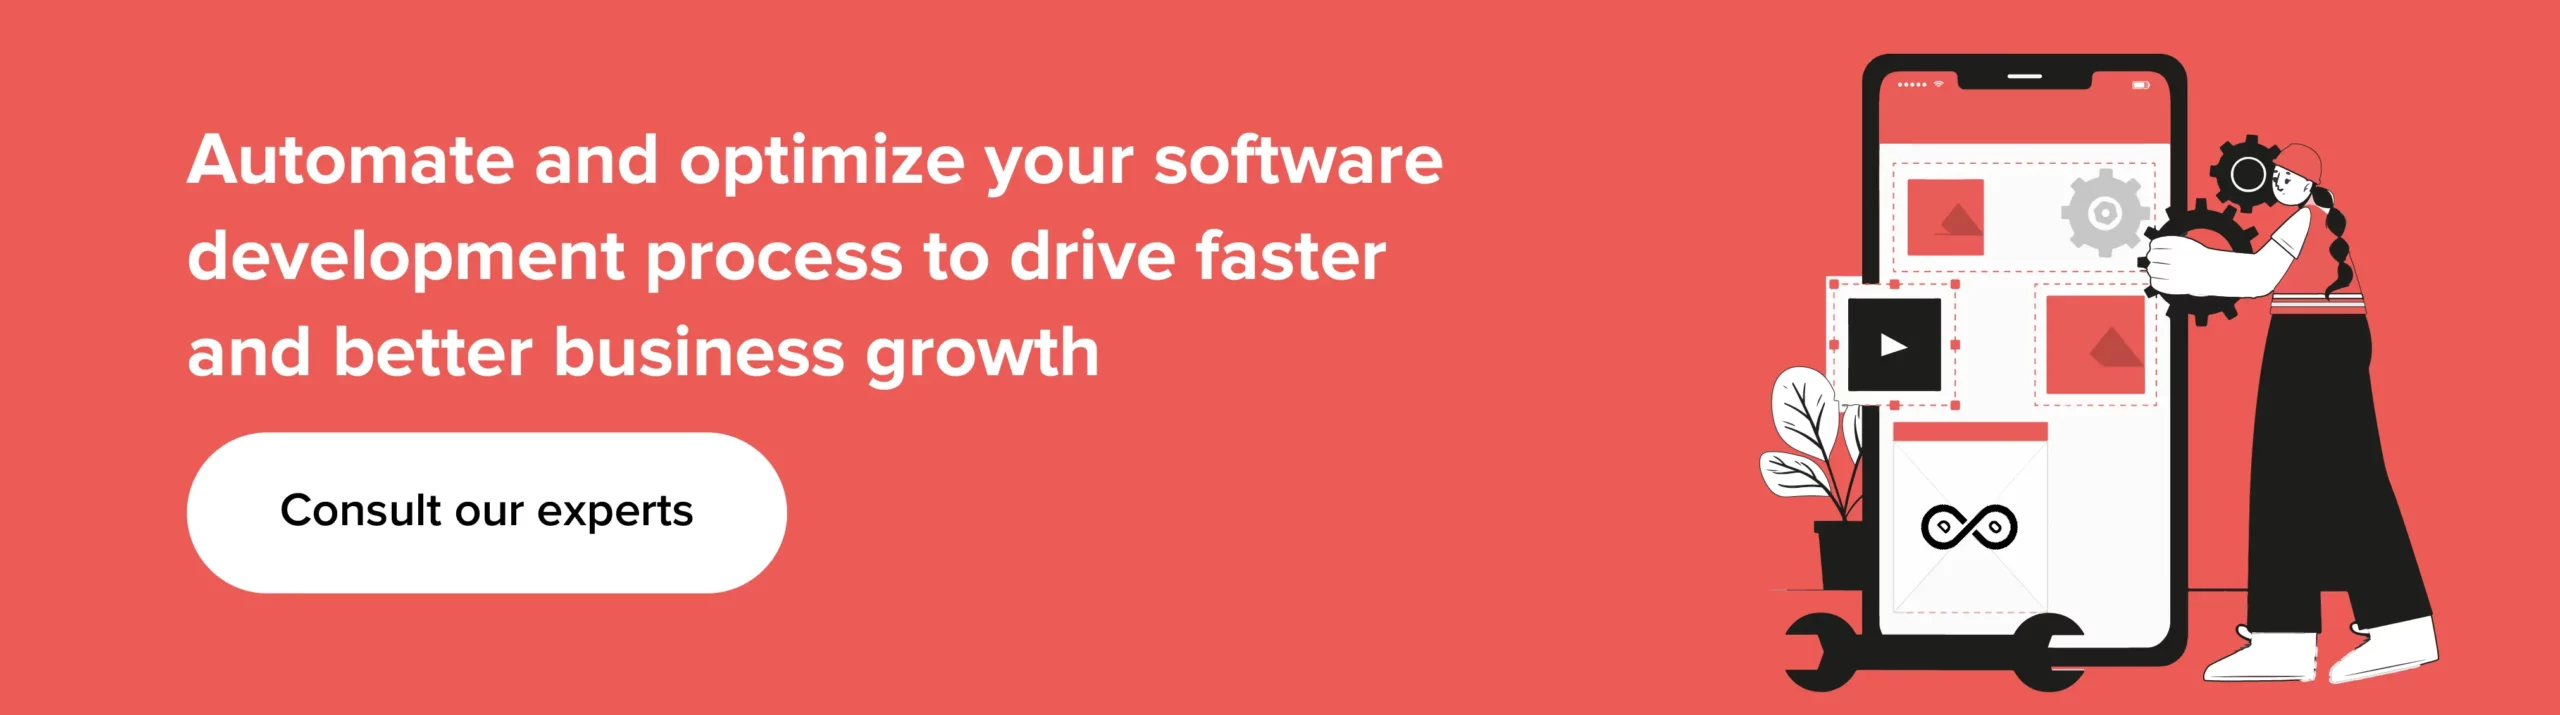 Optimize your software development process with us